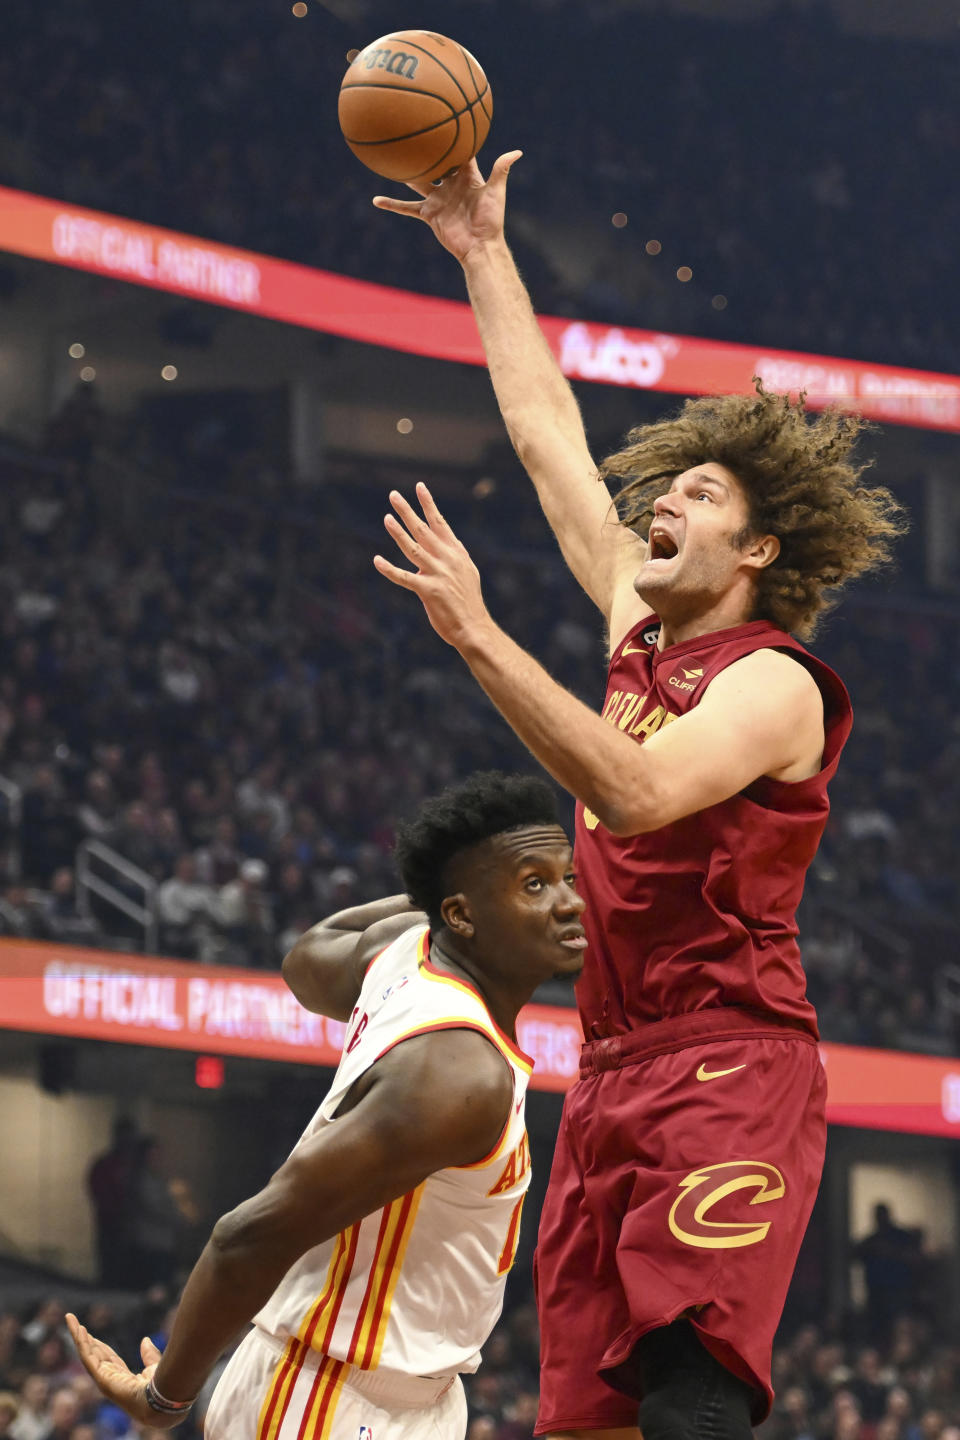 Cleveland Cavaliers center Robin Lopez, right, shoots against Atlanta Hawks center Clint Capela, left, during the first half of an NBA basketball game, Monday, Nov. 21, 2022, in Cleveland. (AP Photo/Nick Cammett)